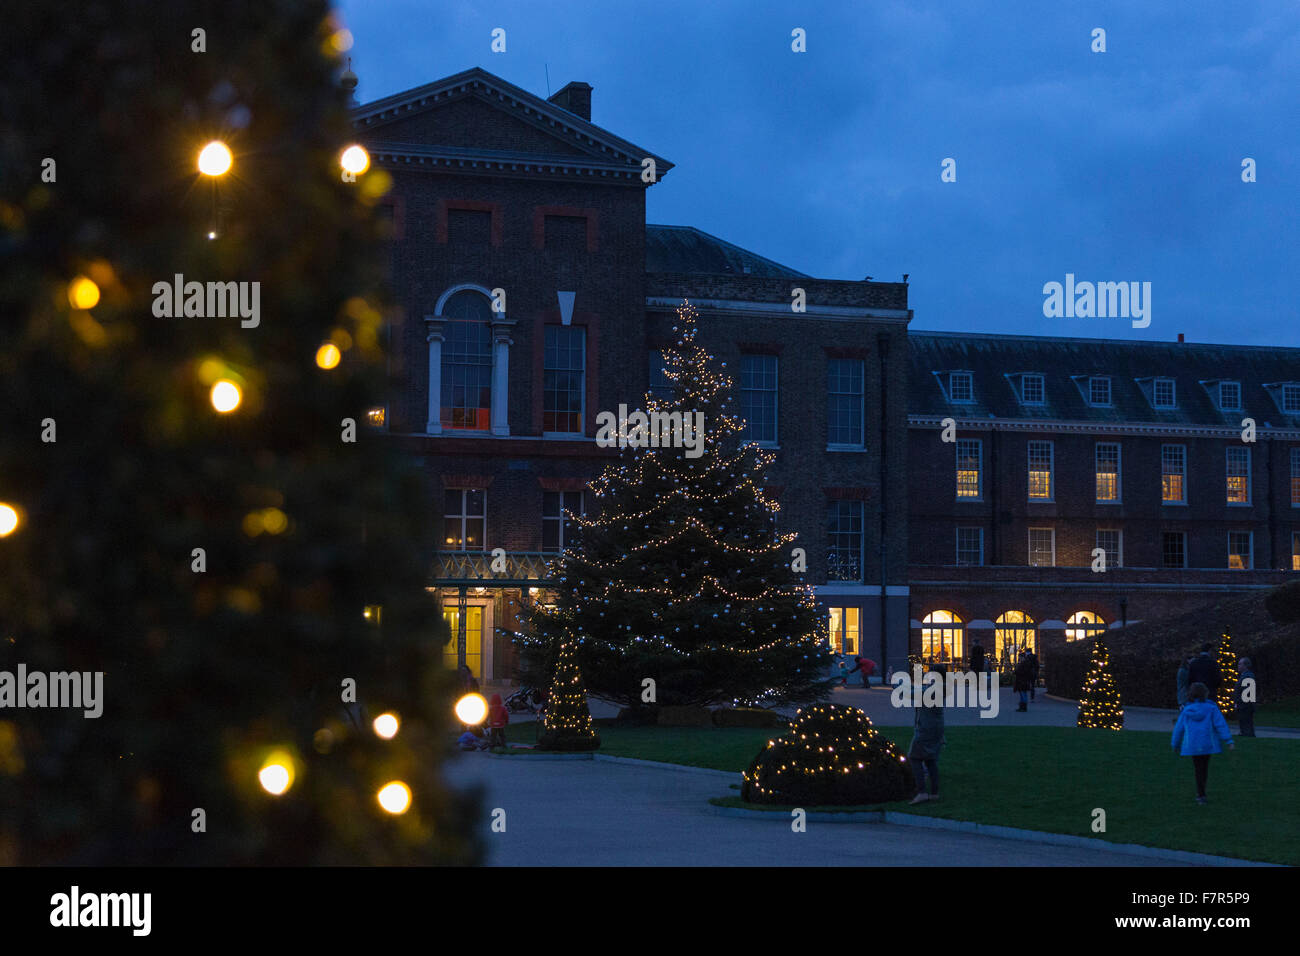 London, UK. 2 December 2015. Children from St Mary Abbots School sing carols outside the east front of Kensington Palace as the 25ft Christmas tree is switched on. Kensington Palace celebrates a Victorian Christmas with special decorations. Credit:  Vibrant Pictures/Alamy Live News Stock Photo